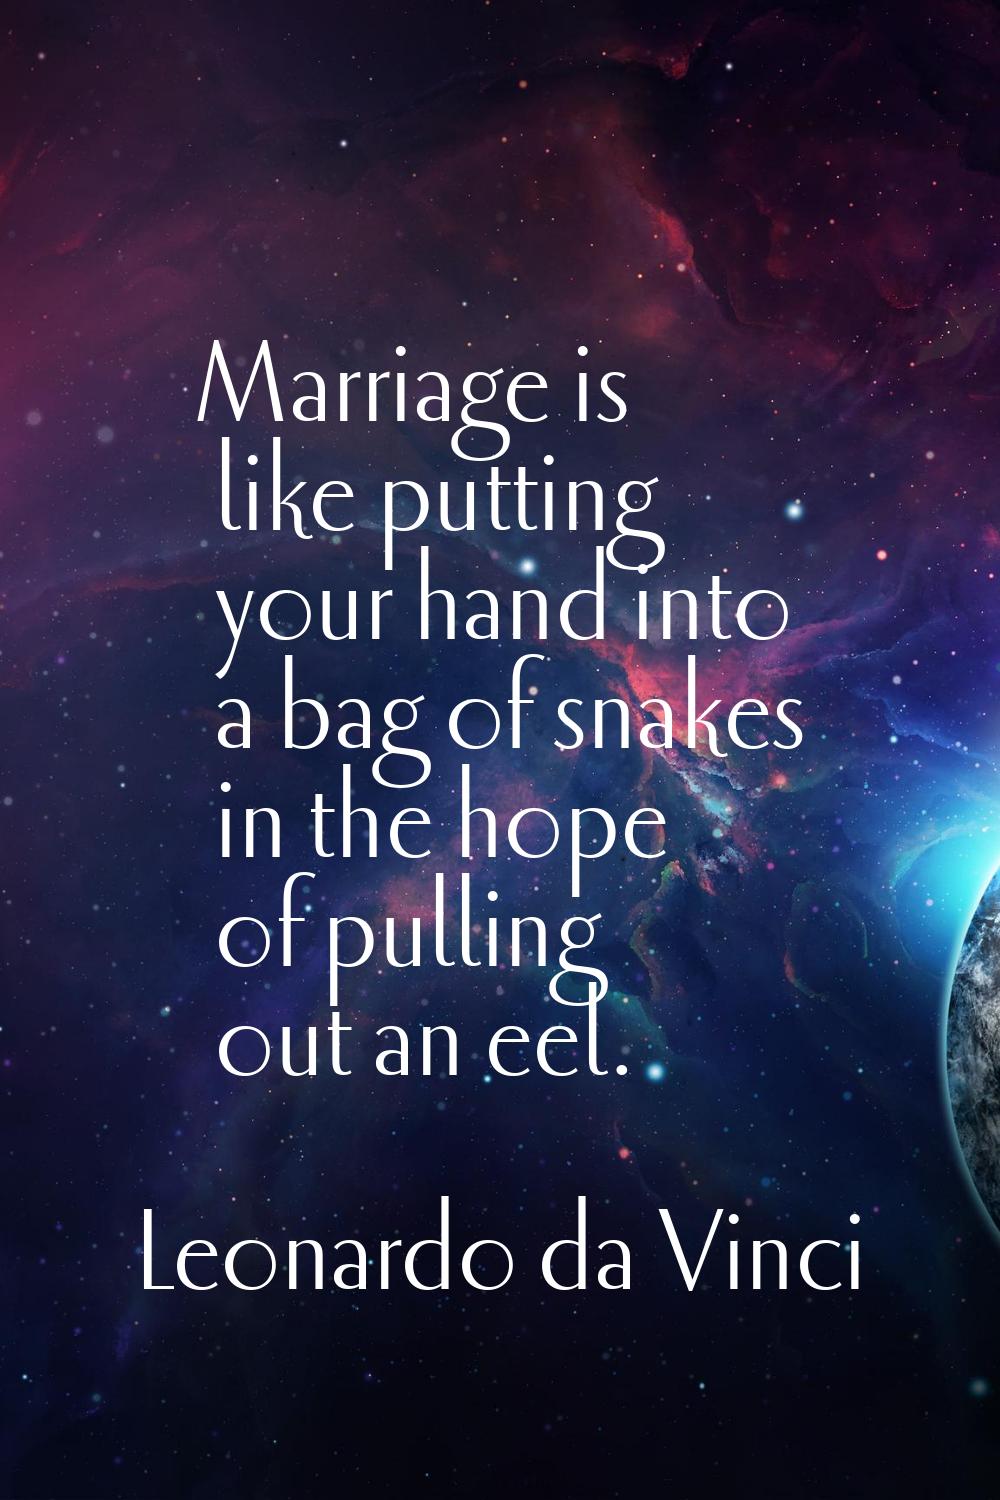 Marriage is like putting your hand into a bag of snakes in the hope of pulling out an eel.